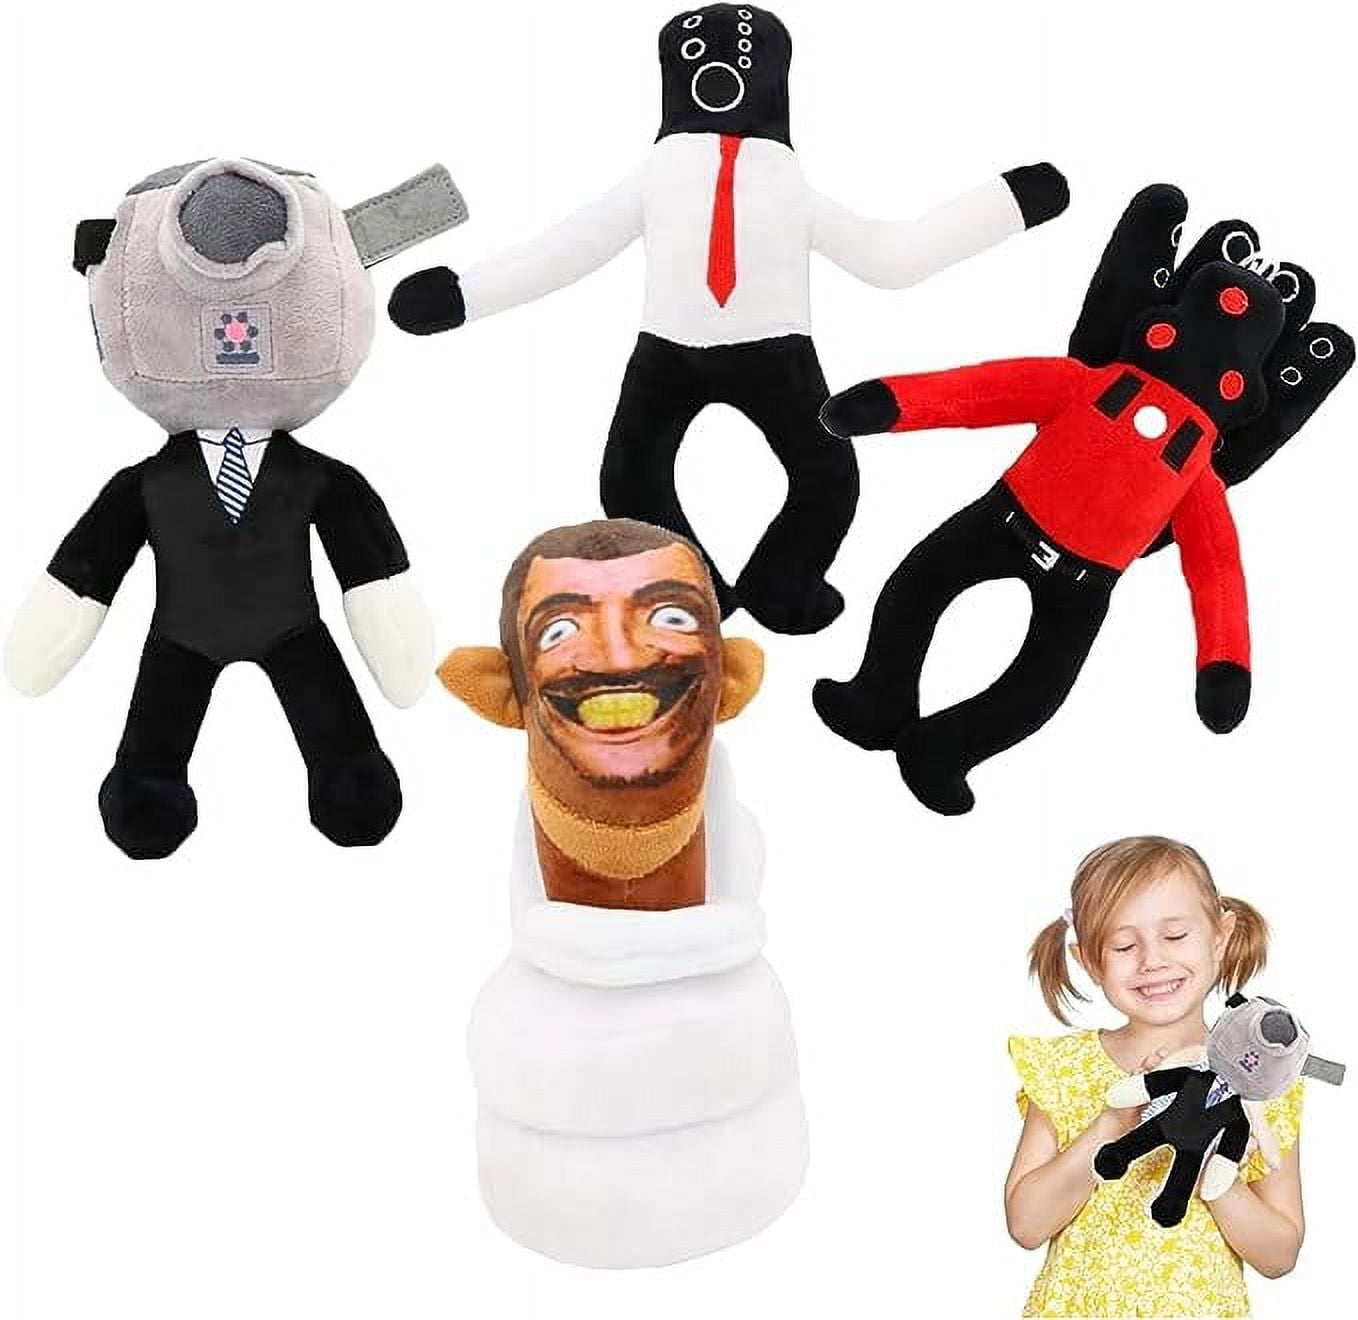  Skibidi Toilet Toy Plush, Cameraman Plush and Speakerman Plush  Set for Kids and Collectors, Horror Game Stuffed plushies Doll Toys  Collectible Gifts for Kids Fans Aldults Birthday : Toys & Games